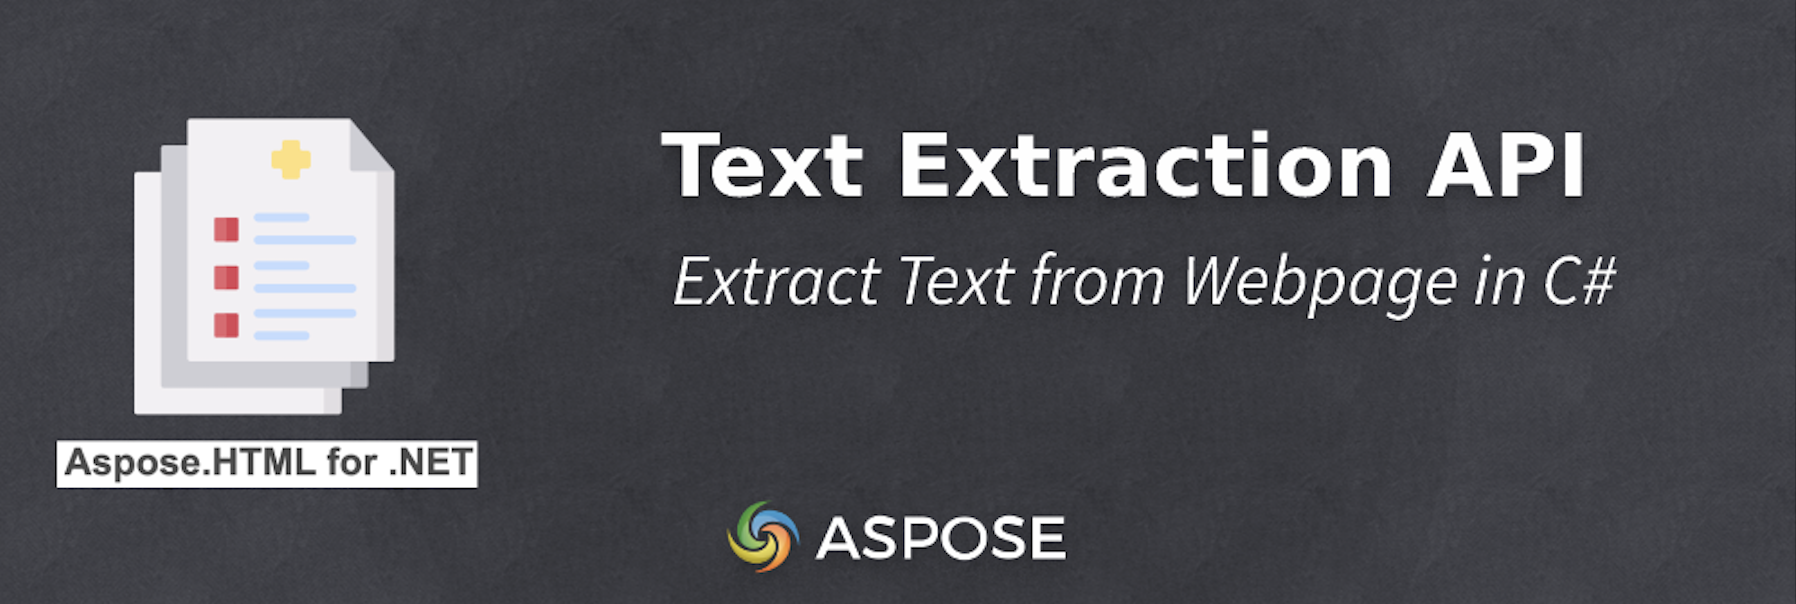 Extract Text from Webpage in C# - Text Extraction API